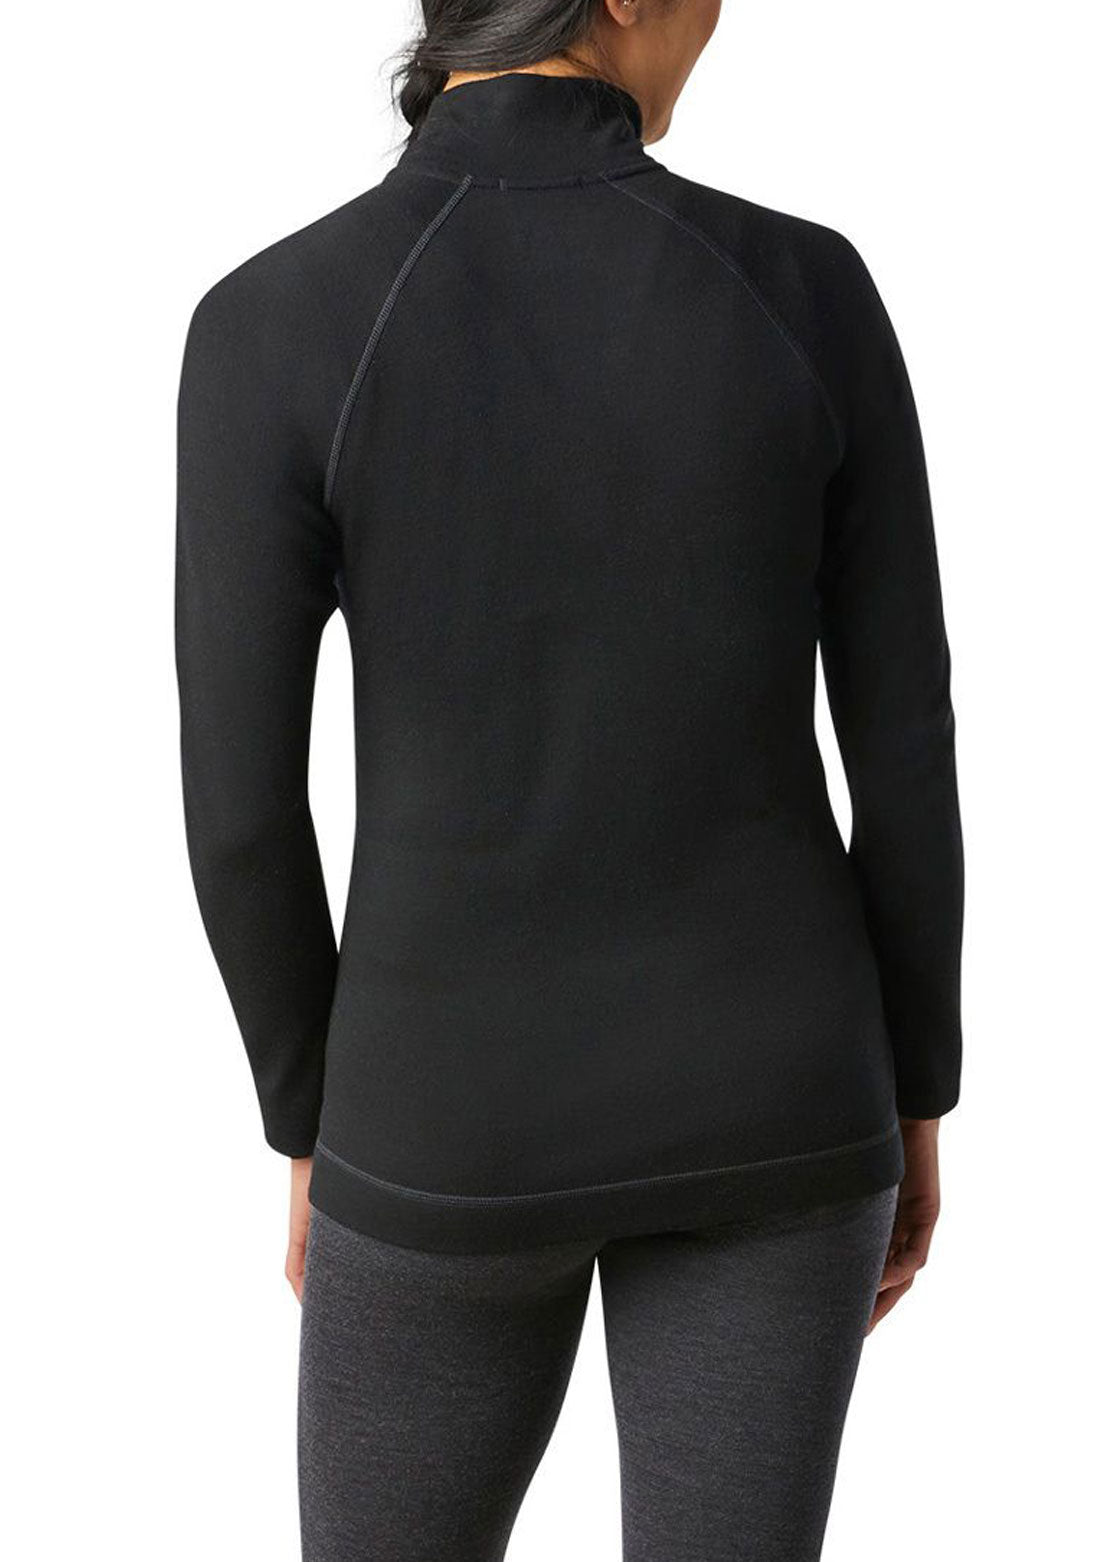 Smartwool Women's Classic Thermal Merino Base Layer 1/4 Zip Boxed Top -  PRFO Sports